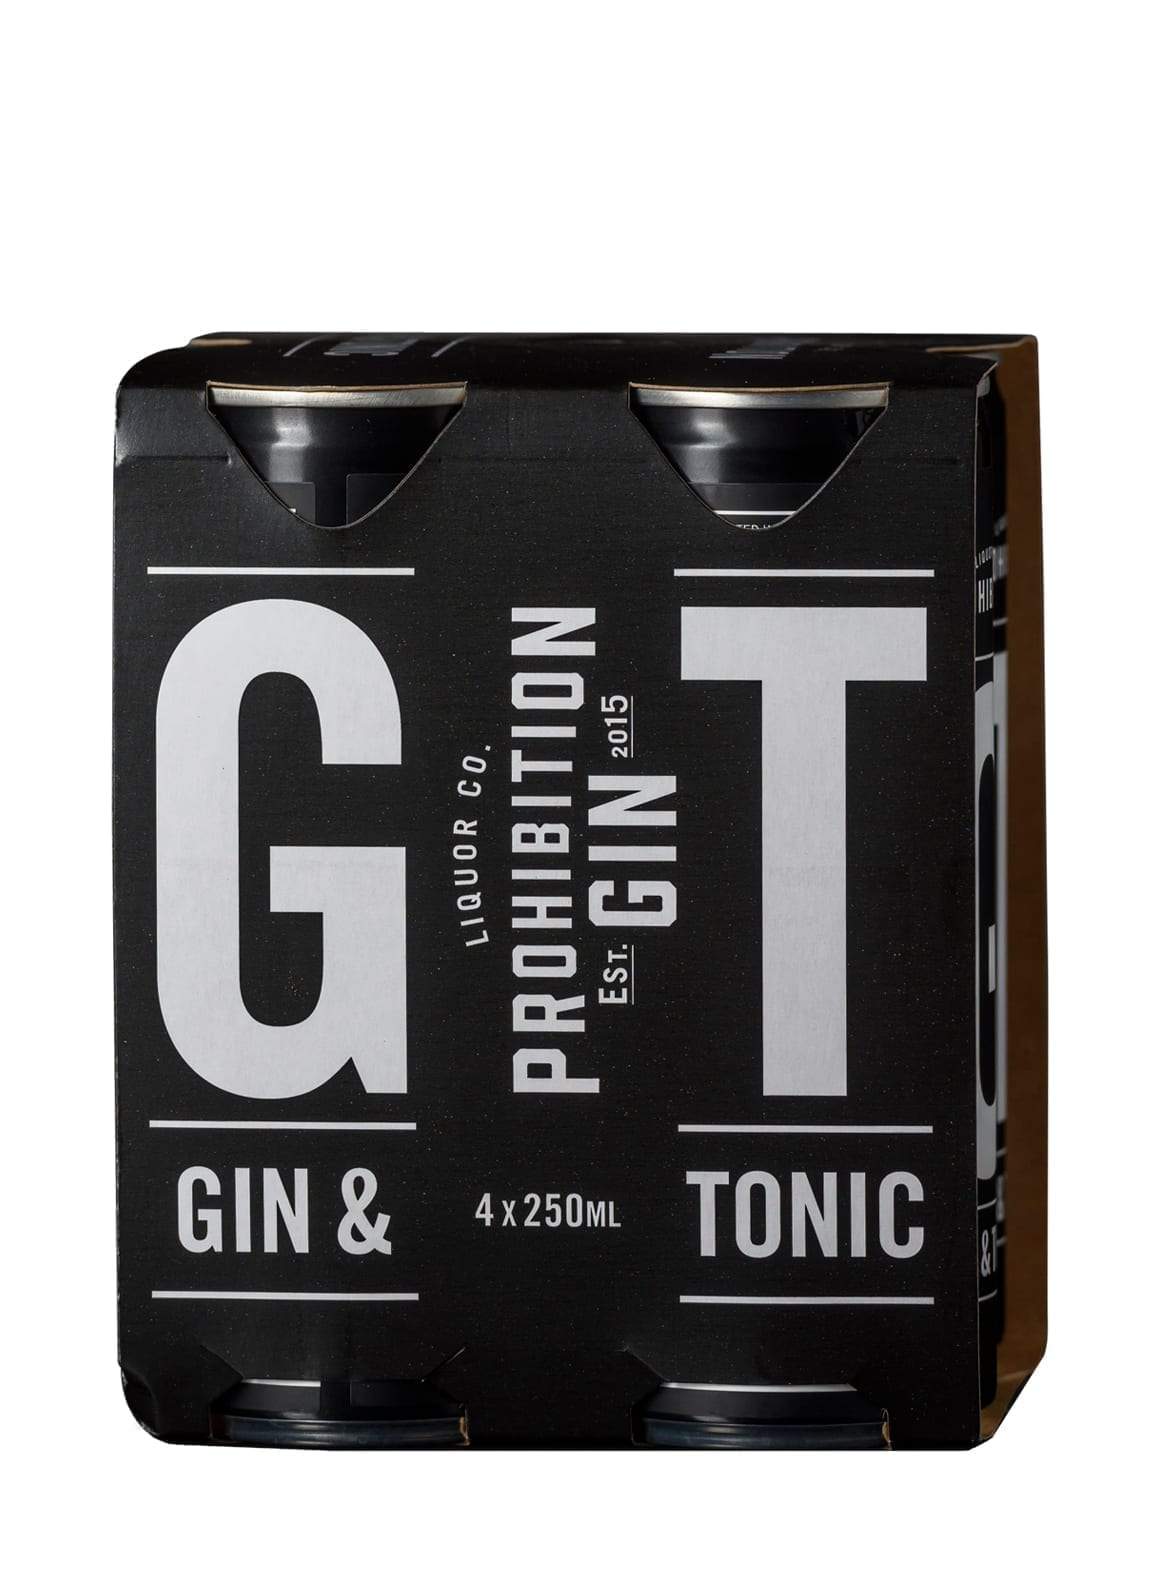 Prohibition Gin & Tonic 4 Pack 5.5% 250ml | Gin | Shop online at Spirits of France